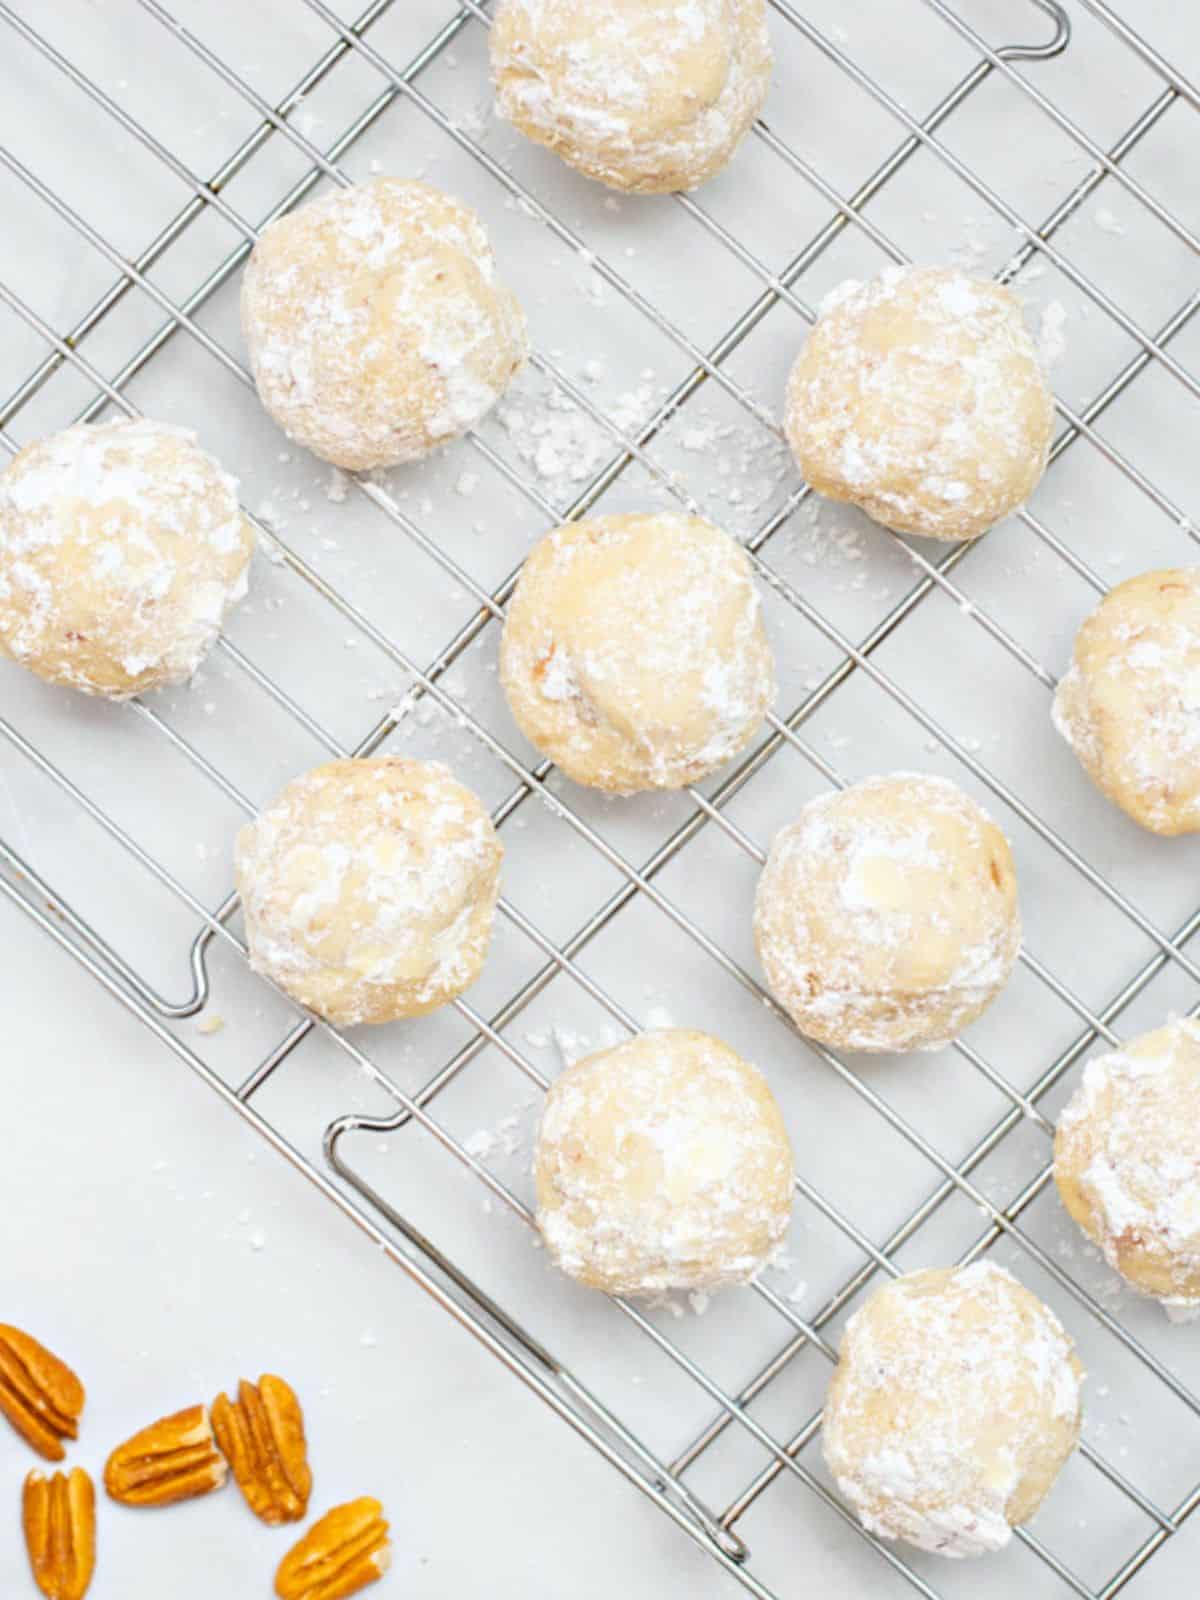 Snowball cookies after being rolled in powdered sugar on cooling rack.